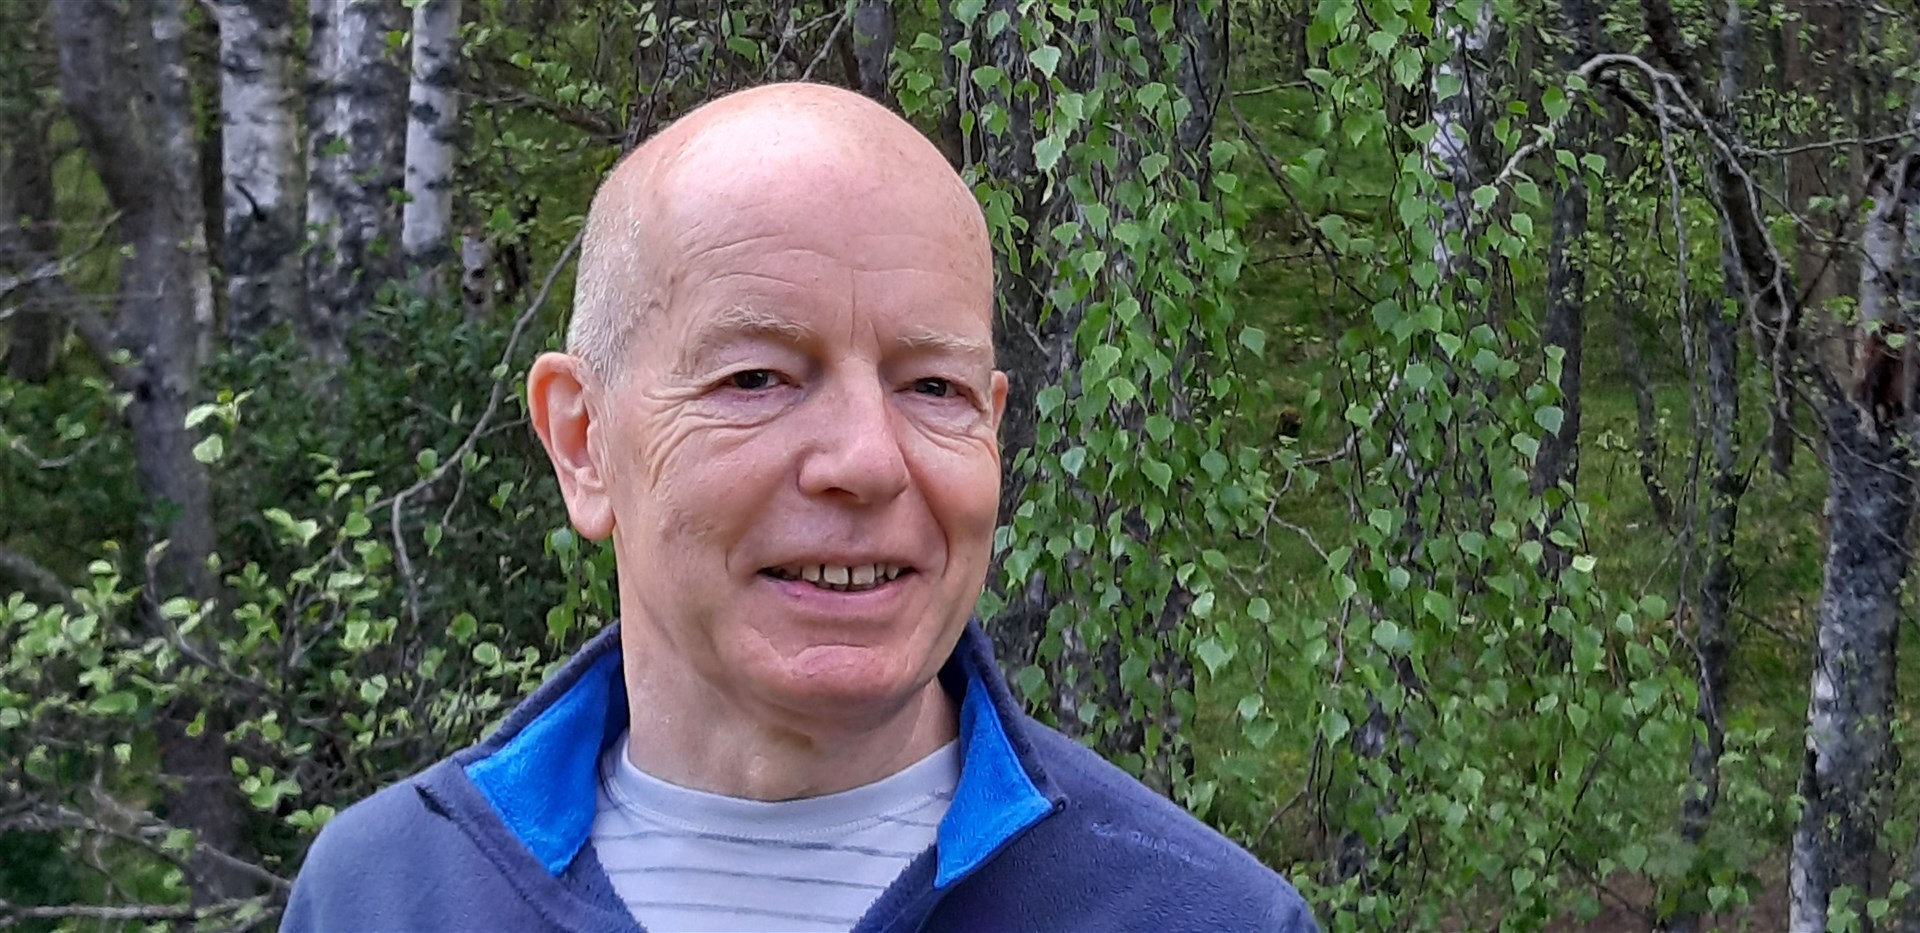 'We are against any reduction in the service' says Peter Long of Aviemore's community council